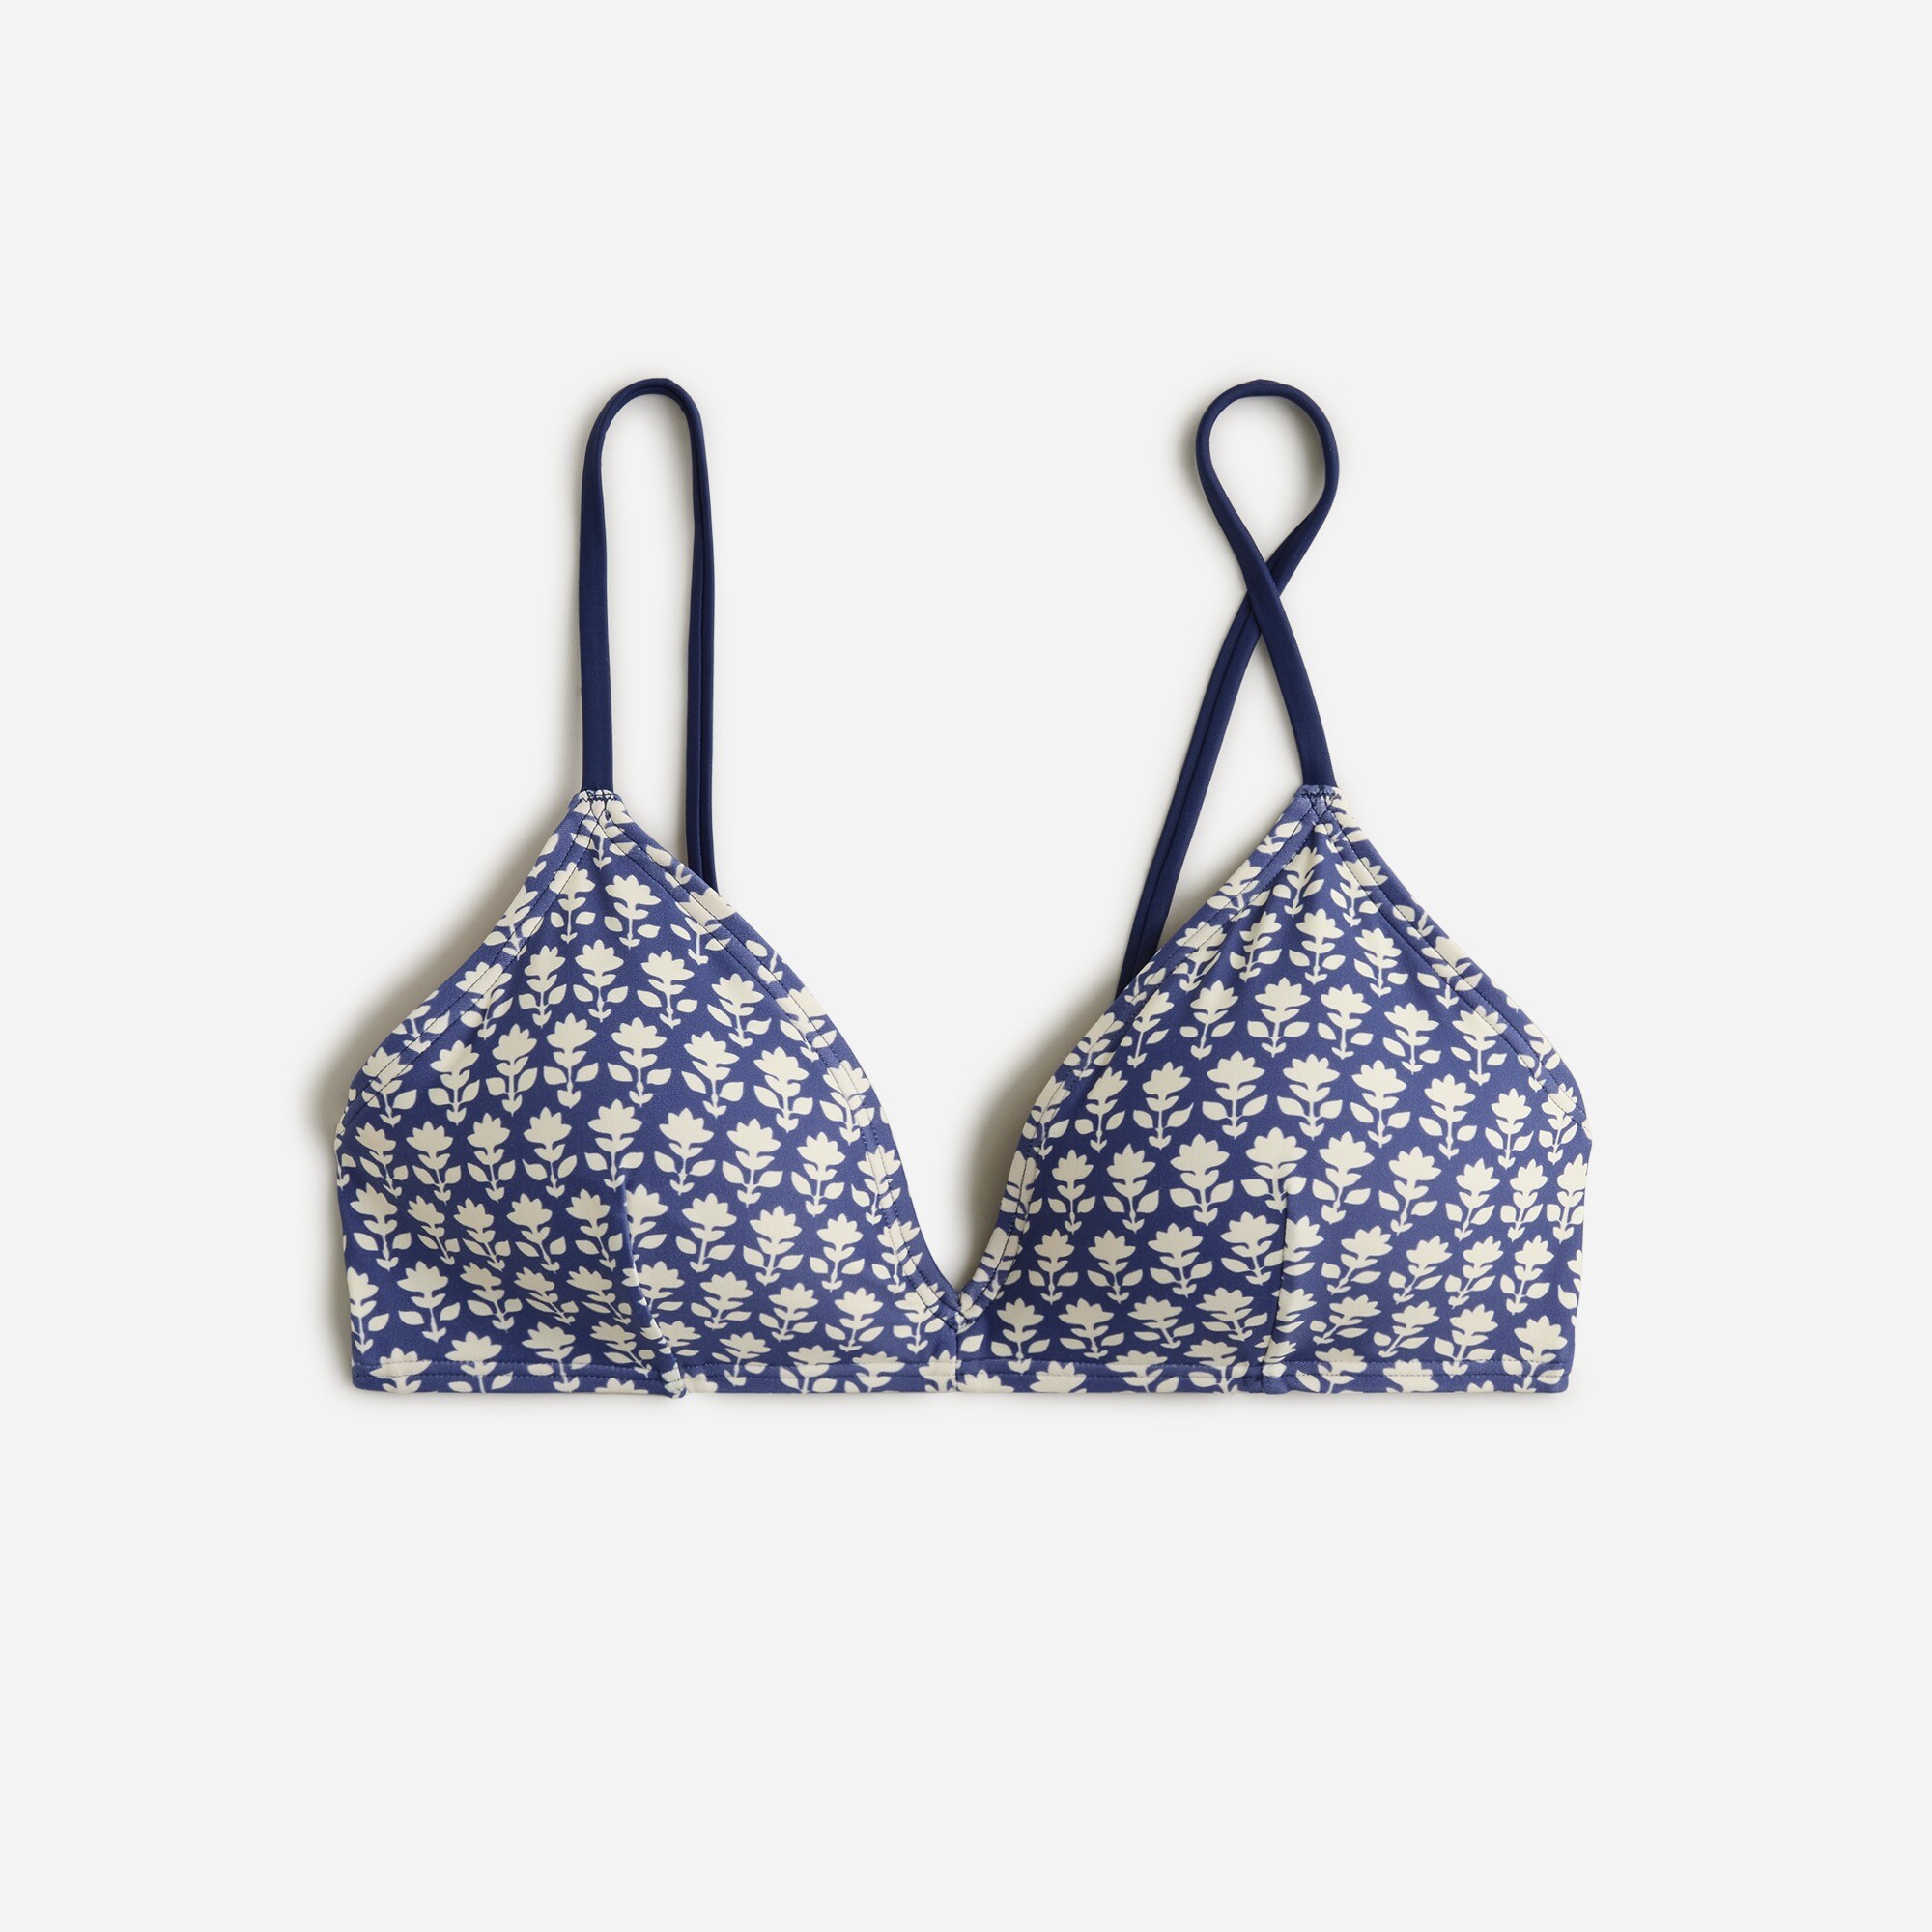  French bikini top in blue stamp floral